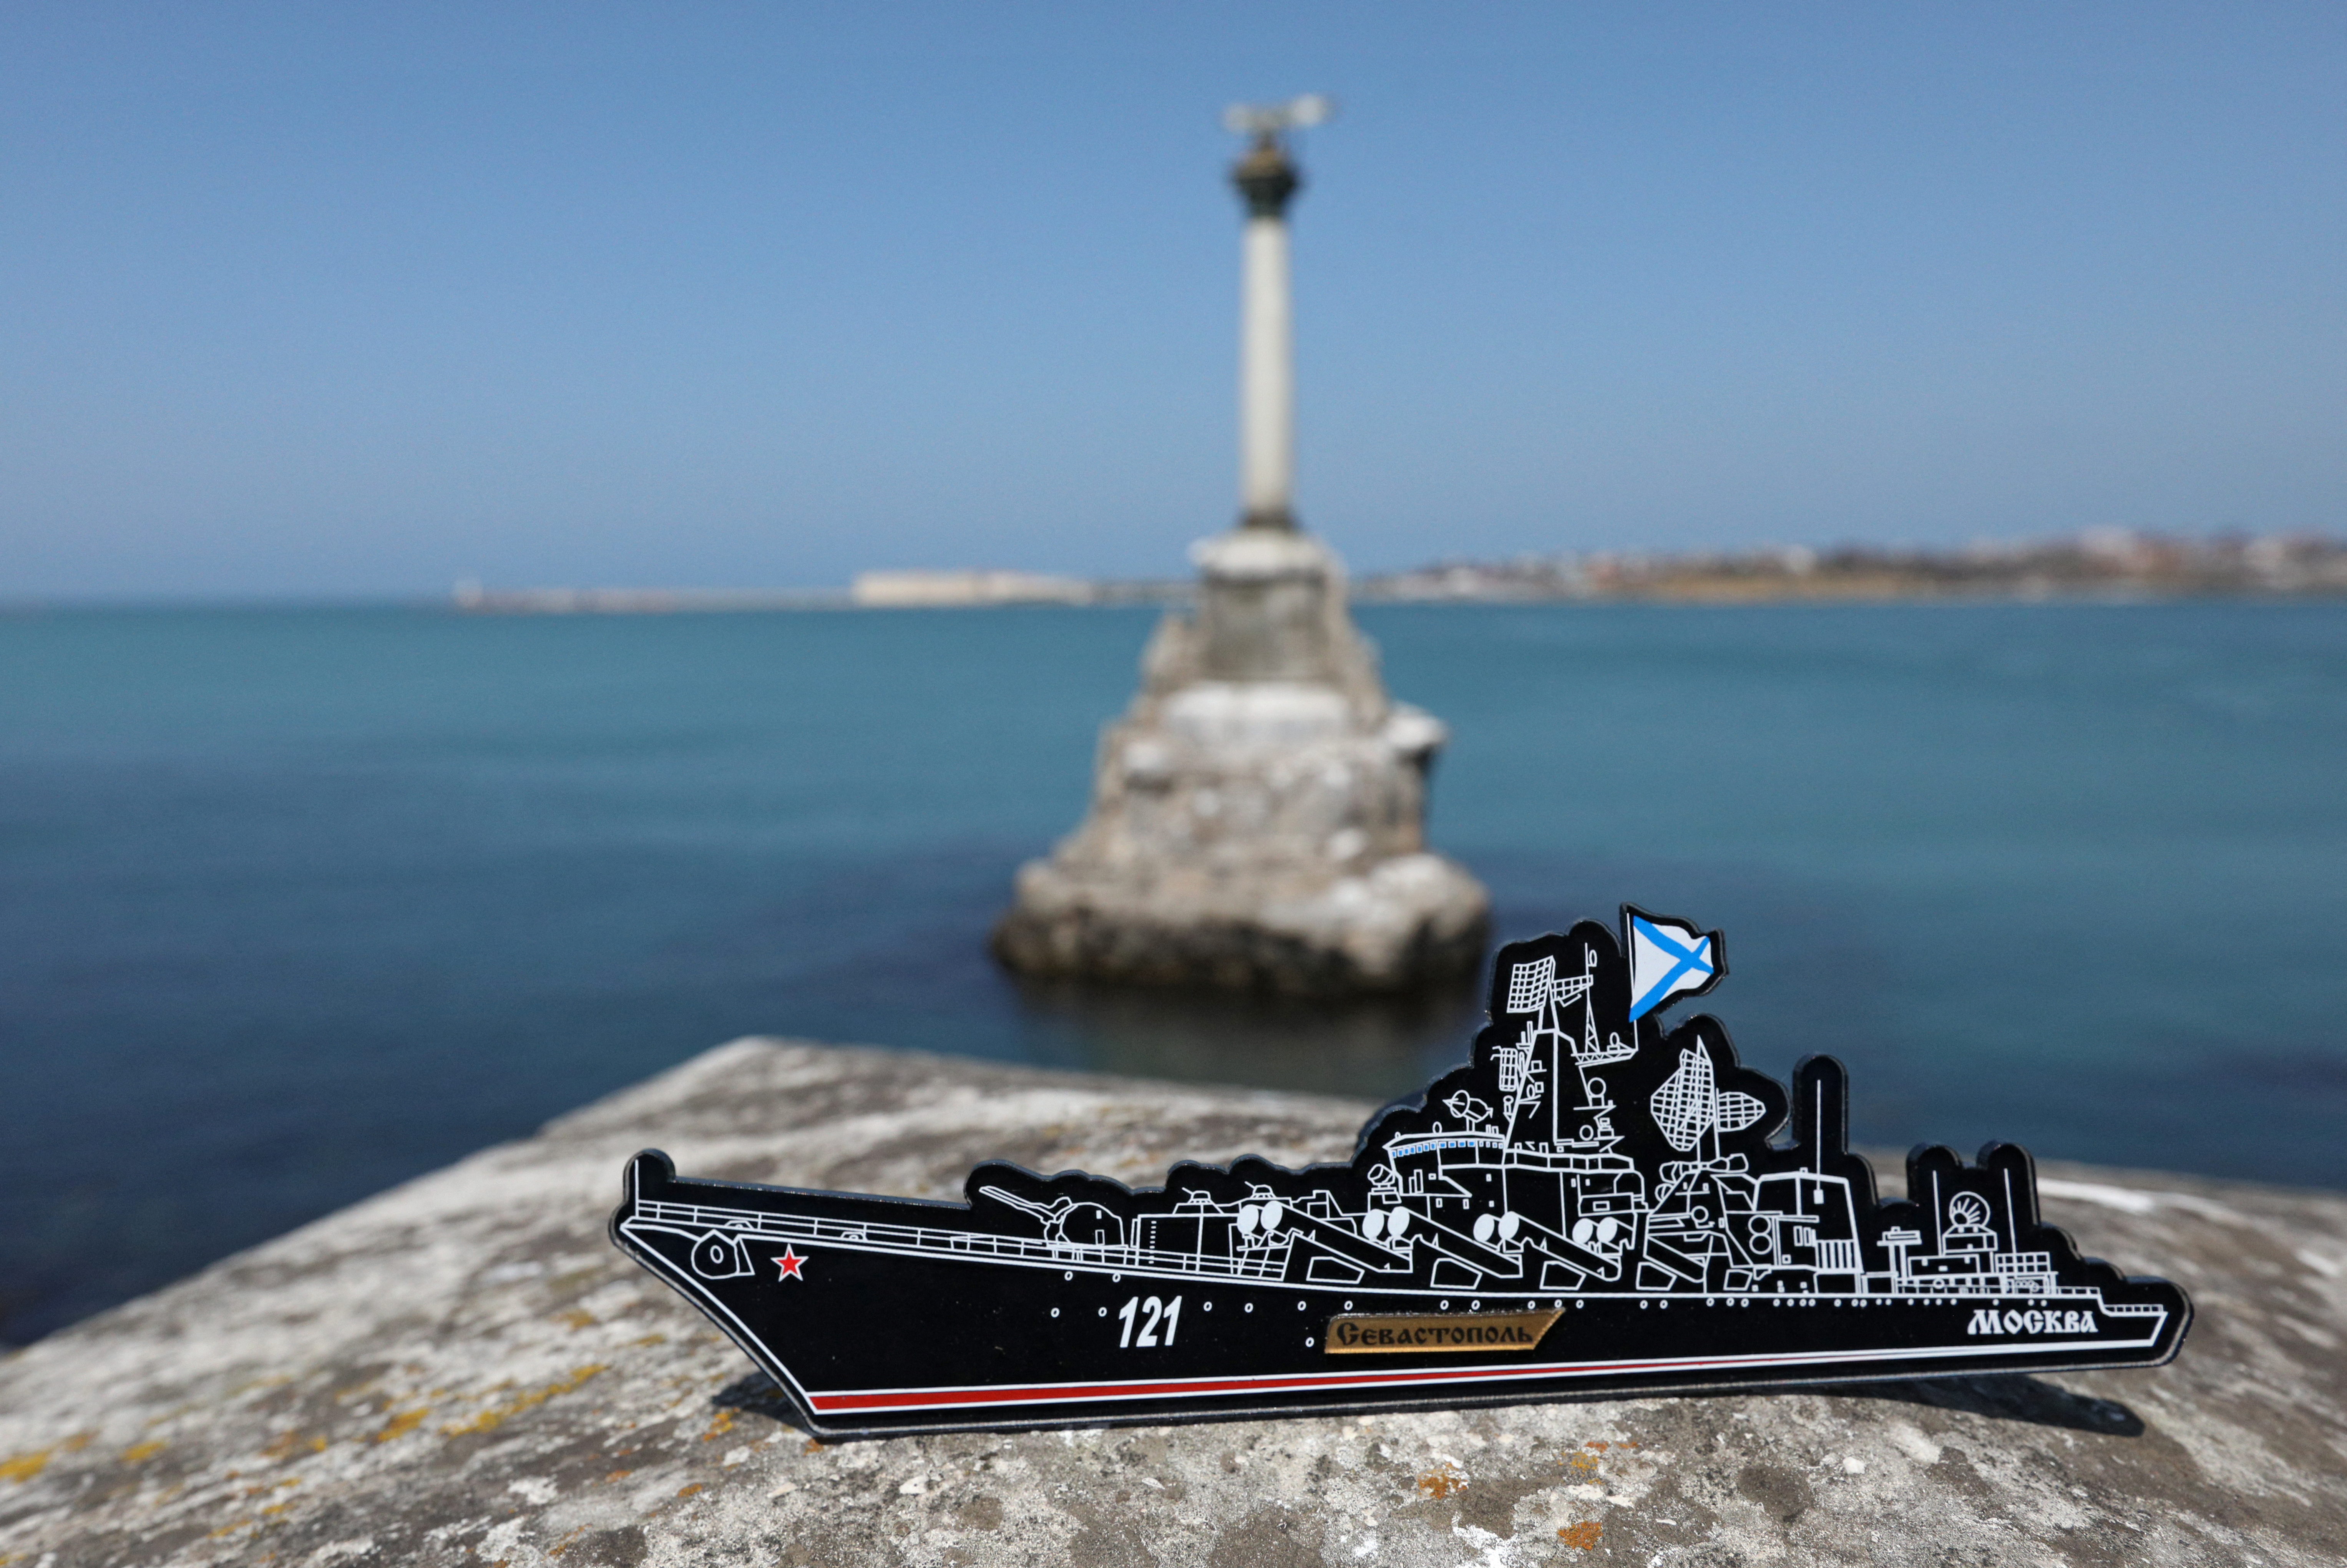 A magnet depicting the Russian missile cruiser Moskva, which sank in the Black Sea following a fire, is pictured at an embankment in Sevastopol